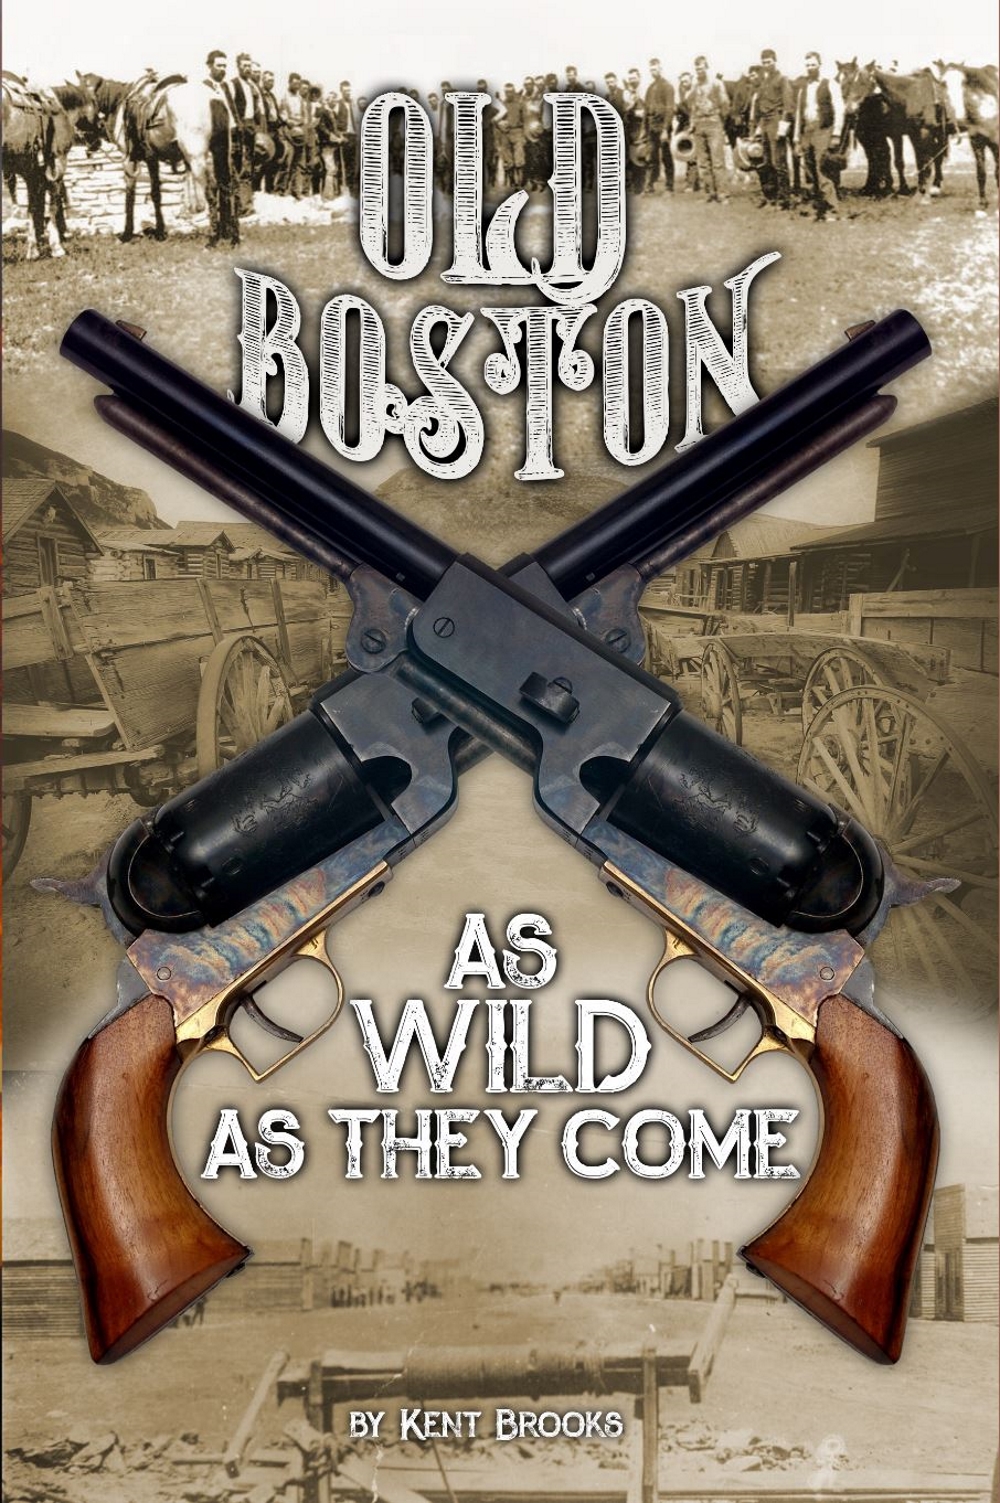 Was Old Boston Really As Wild As They Come?